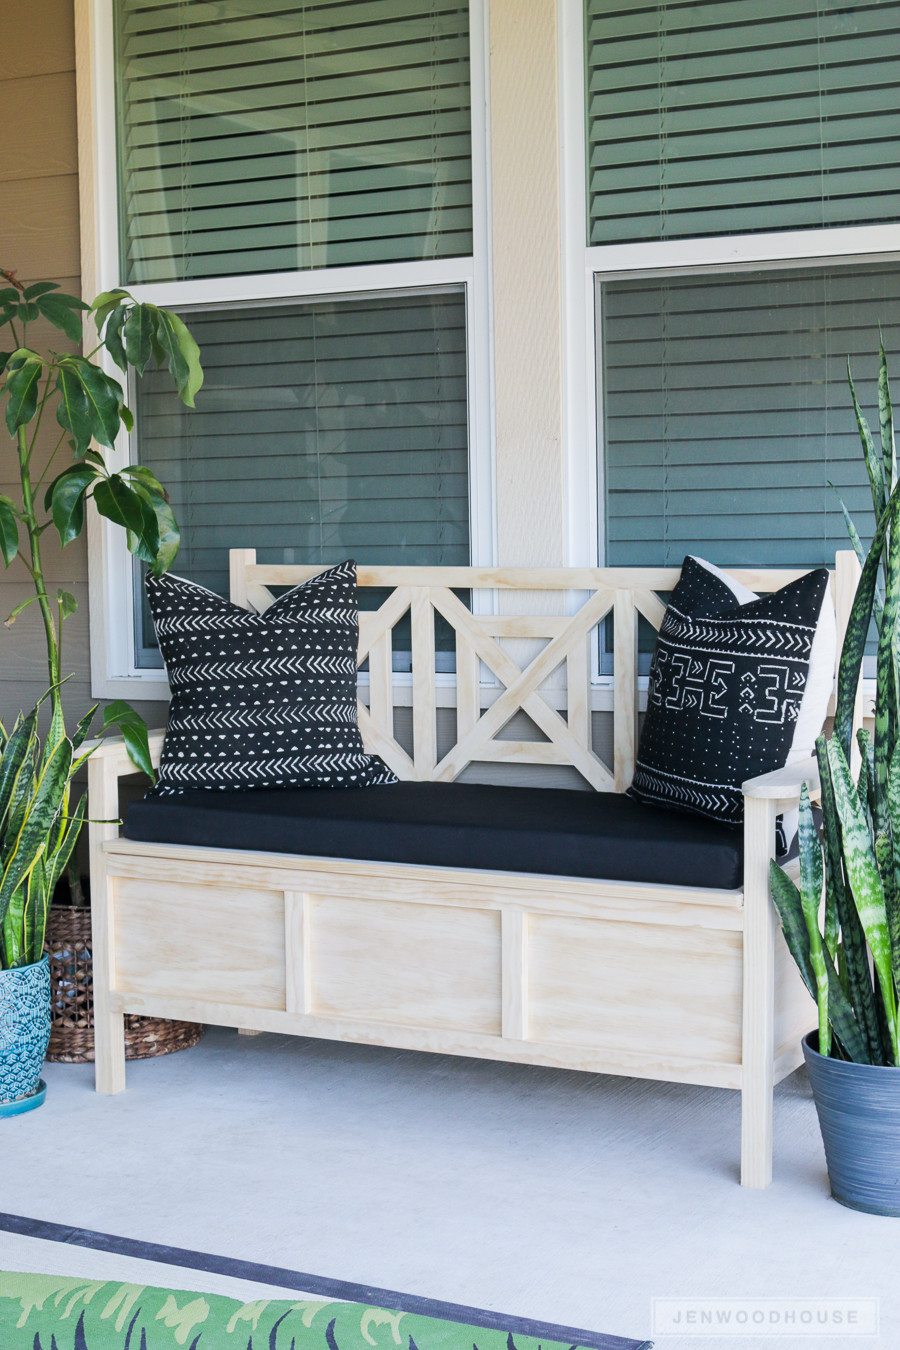 DIY Outdoor Bench With Storage
 How To Build A DIY Outdoor Storage Bench